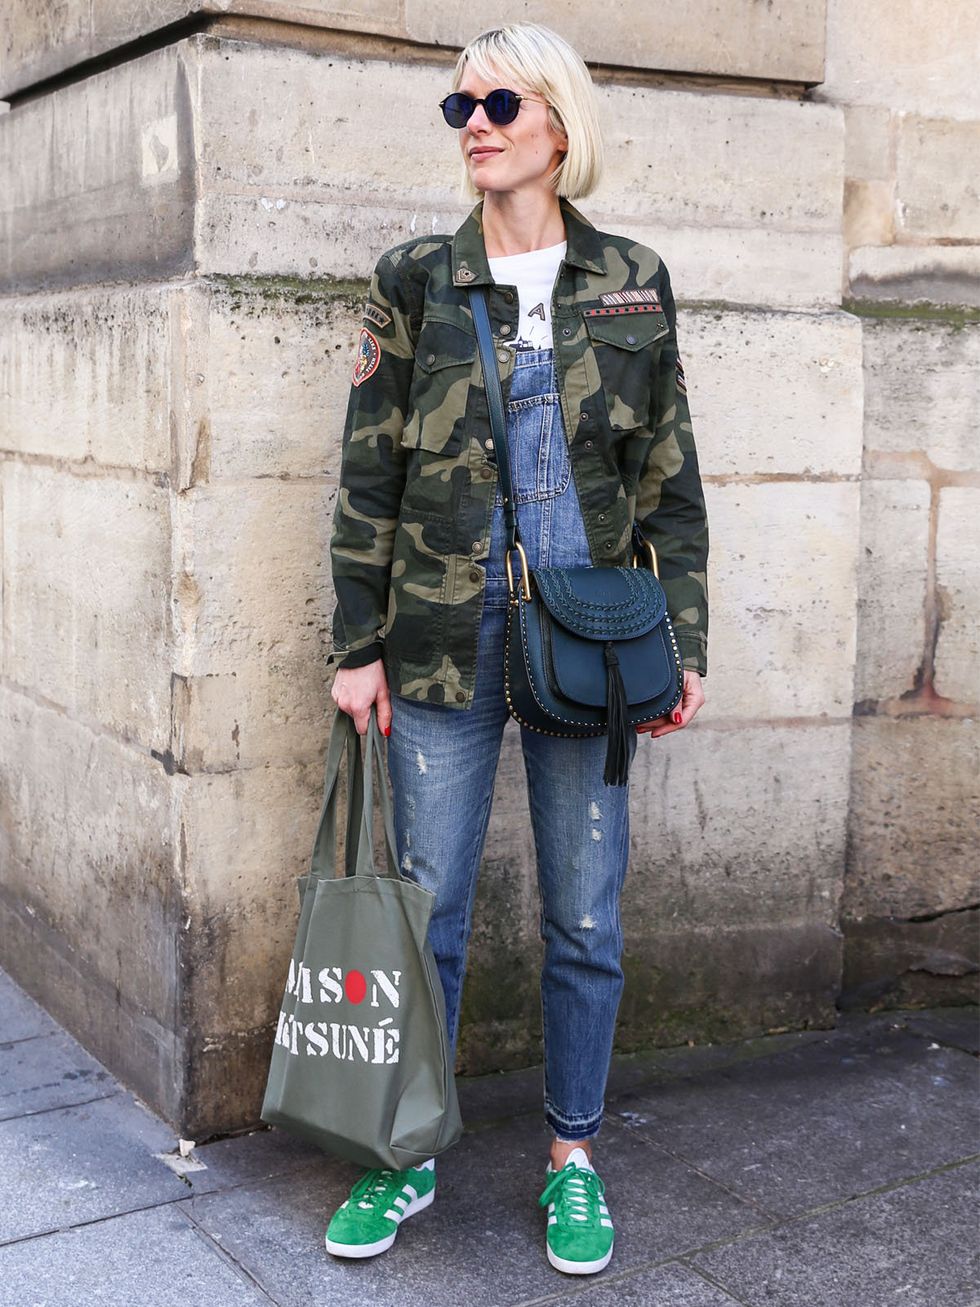 Clothing, Street fashion, Green, Military camouflage, Fashion, Camouflage, Jacket, Jeans, Coat, Outerwear, 